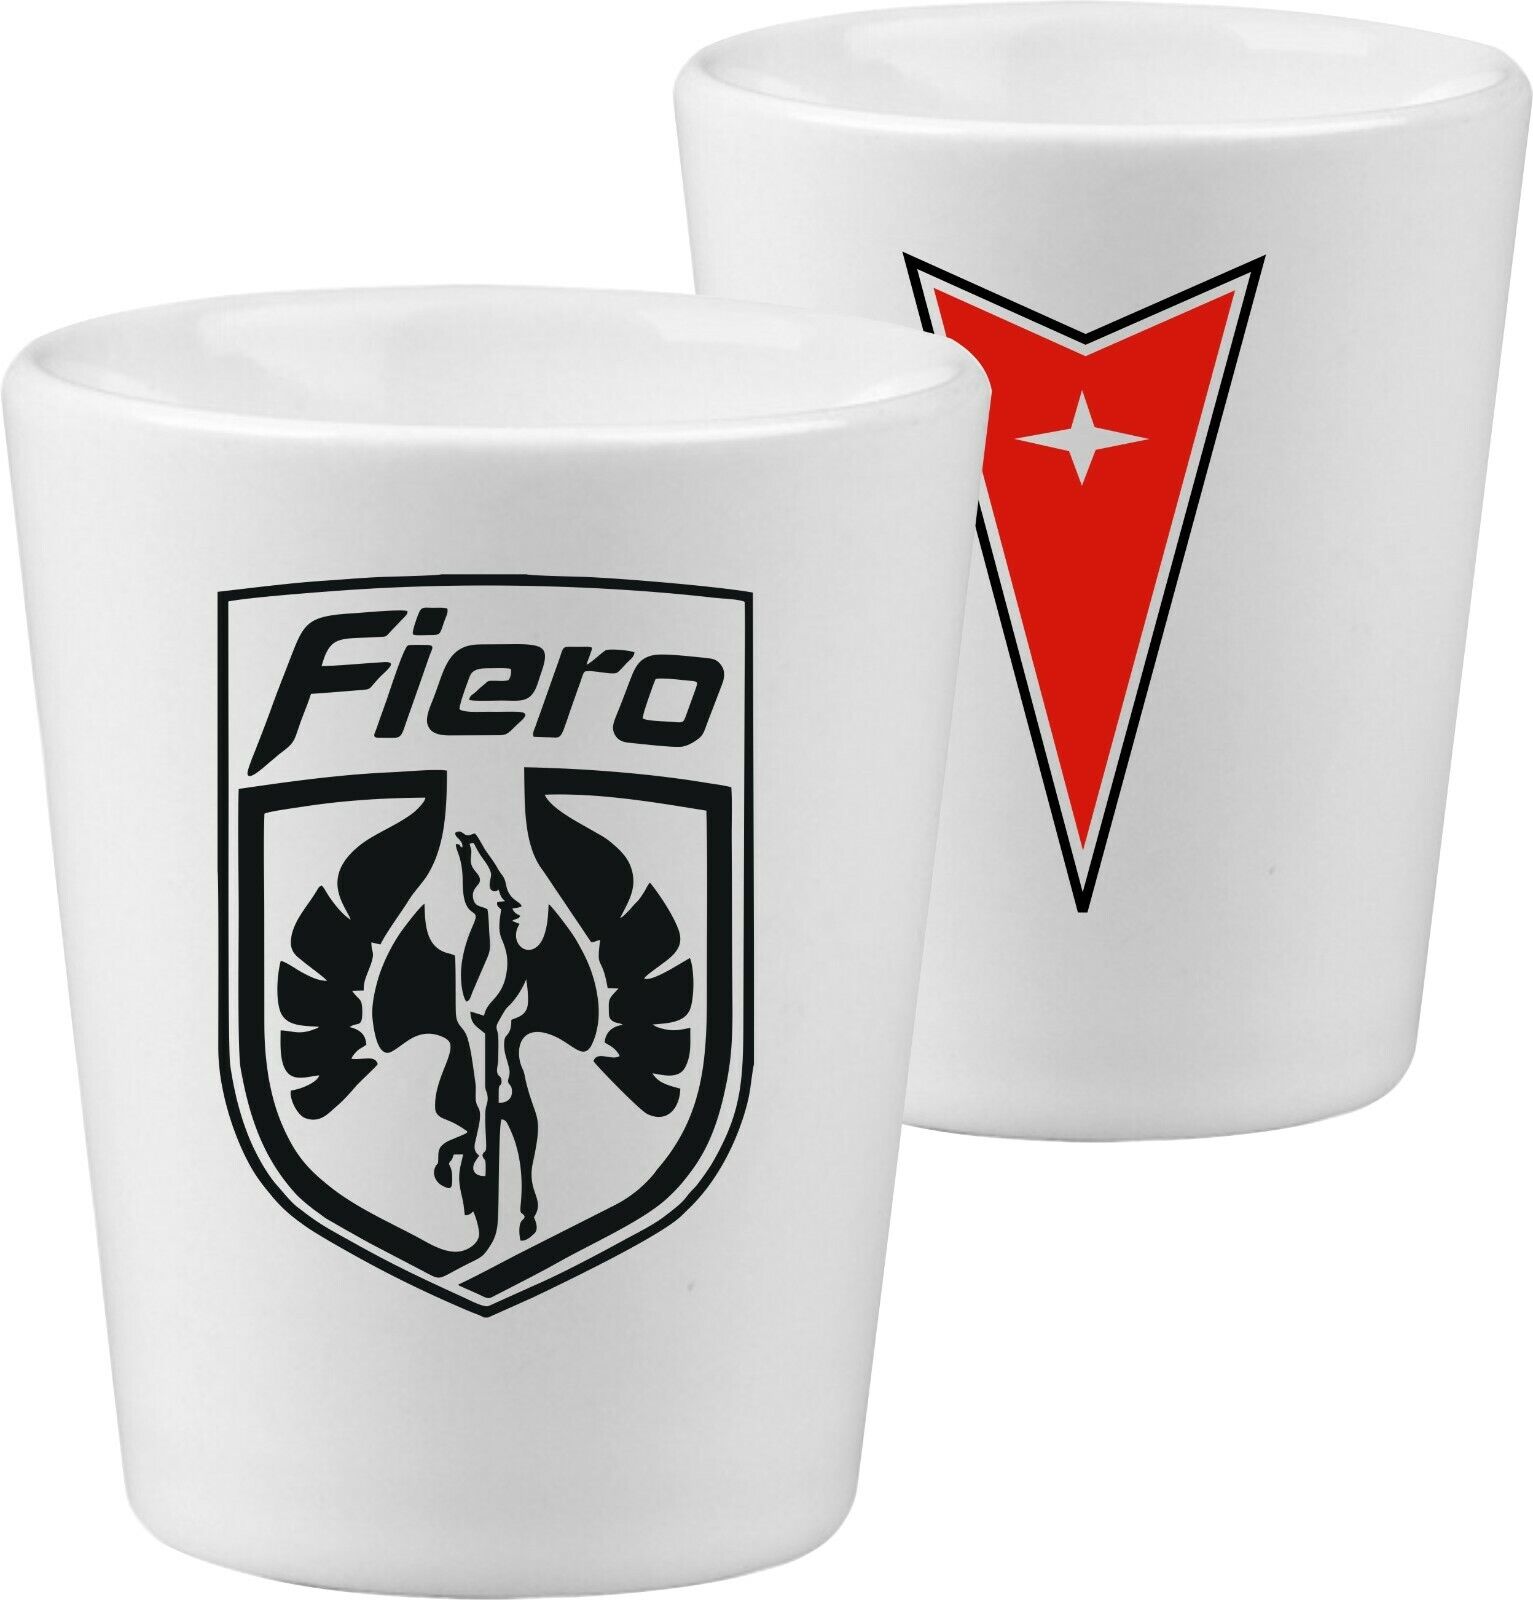 PONTIAC FIERO SHOT GLASS COLLECTION - NEW - 40% BIGGER GRAPHICS - MADE IN USA